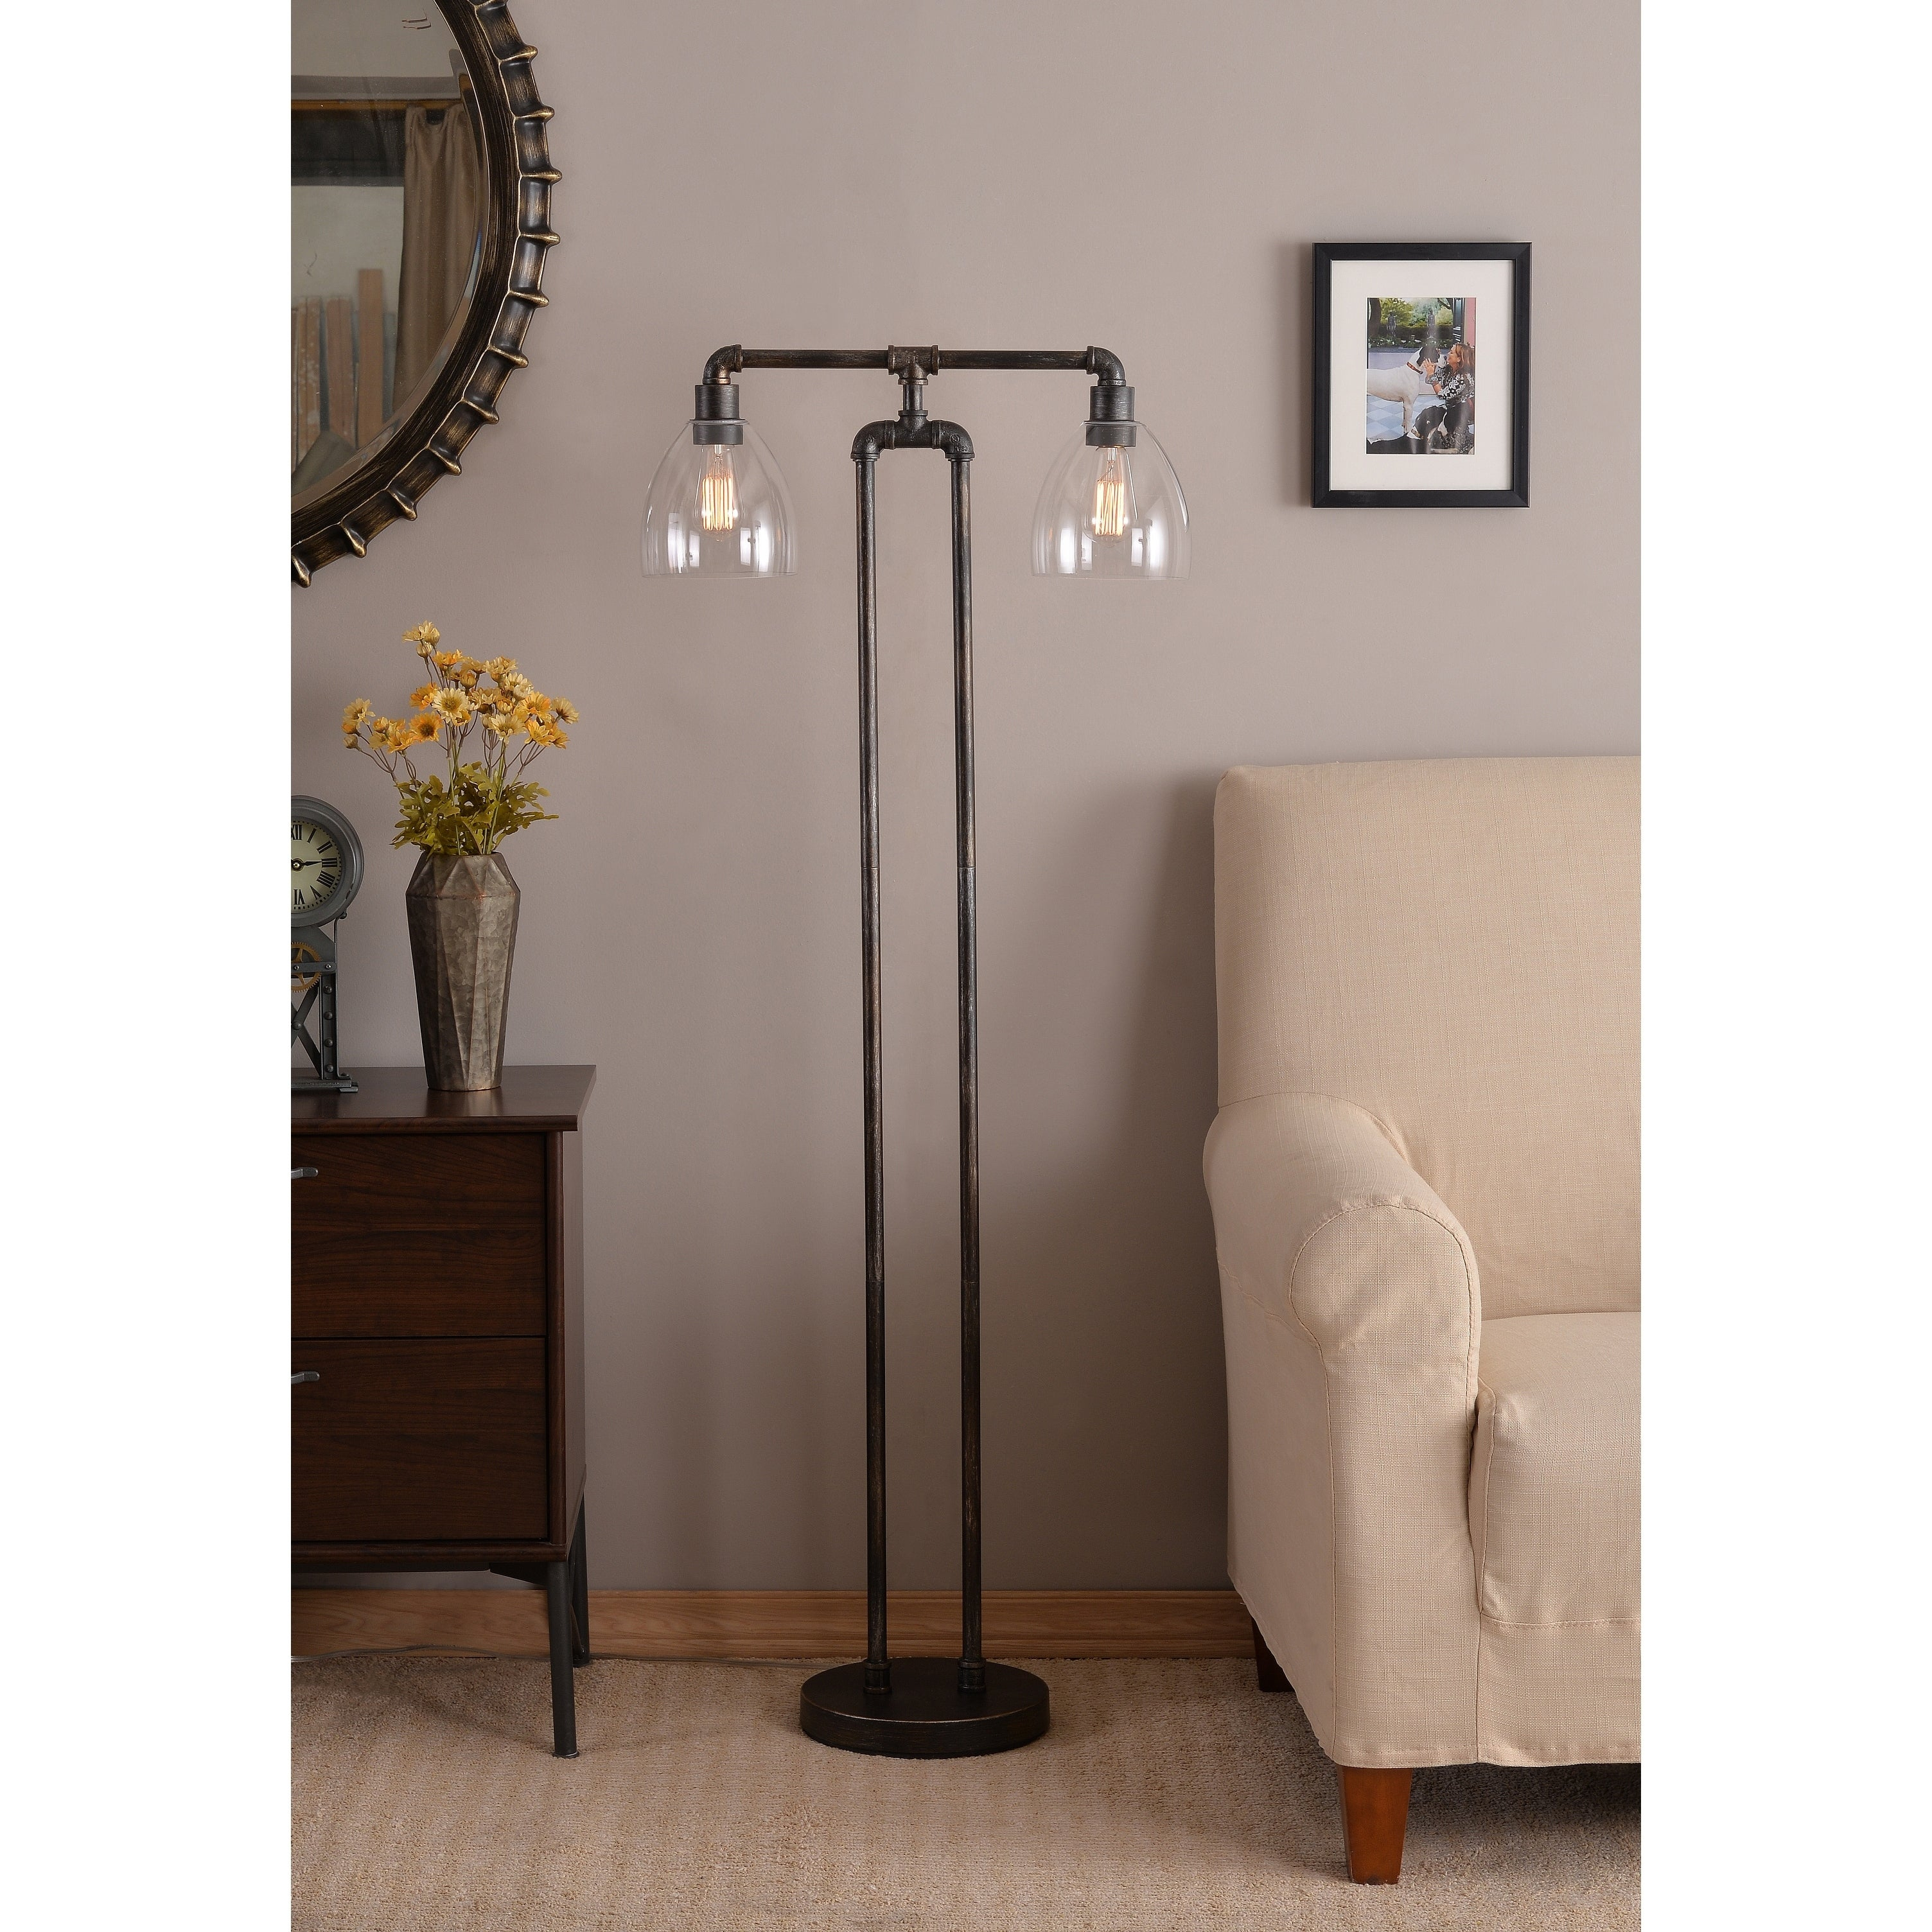 Piper 5525 Floor Lamp Vintage Metal with regard to sizing 3008 X 3008